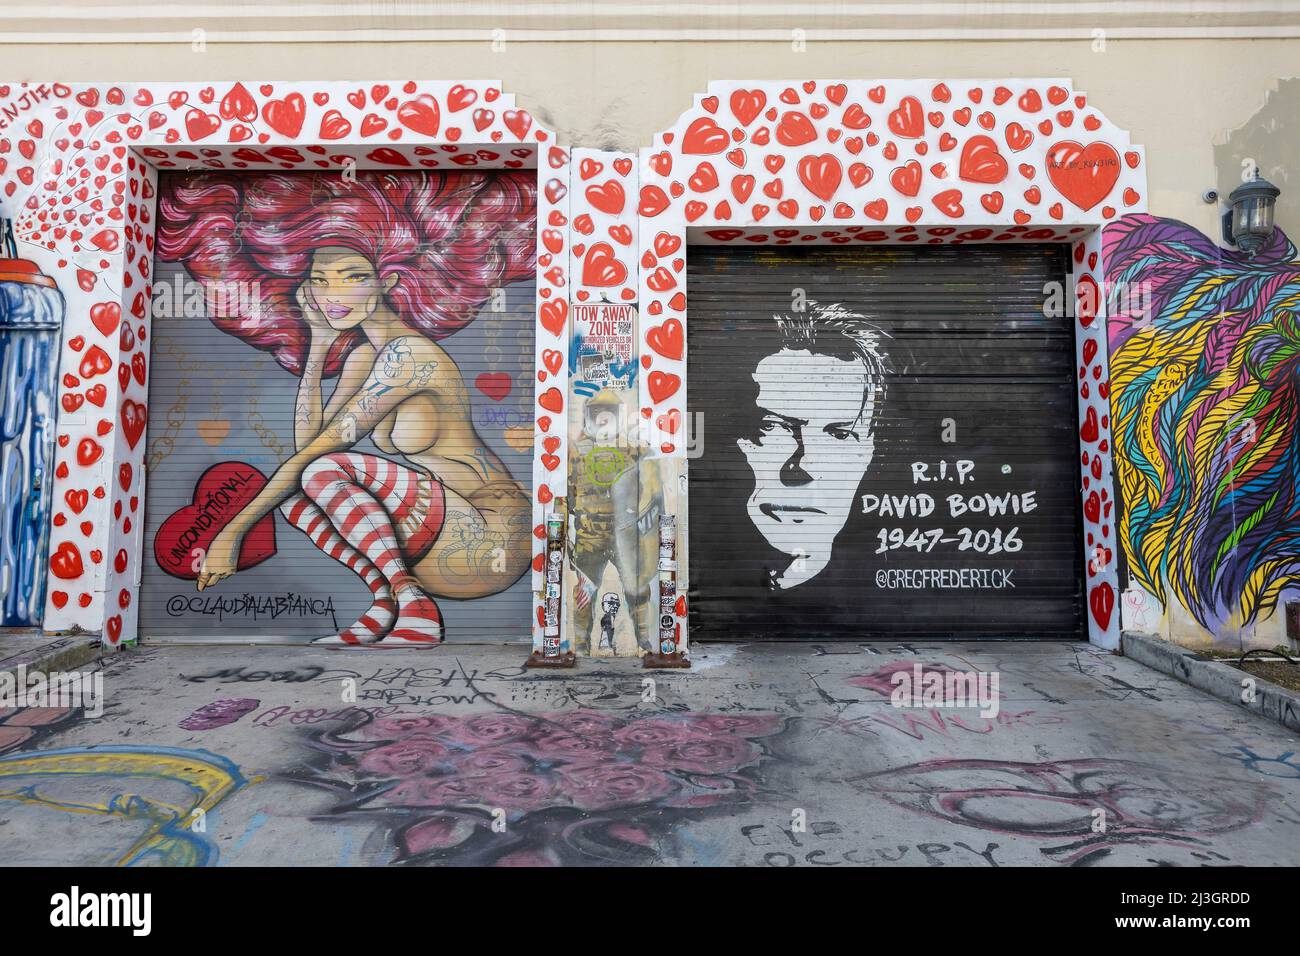 United States, Florida, Miami, black and white mural of David Bowie by artist Greg Frederik in the Wynwood district Stock Photo